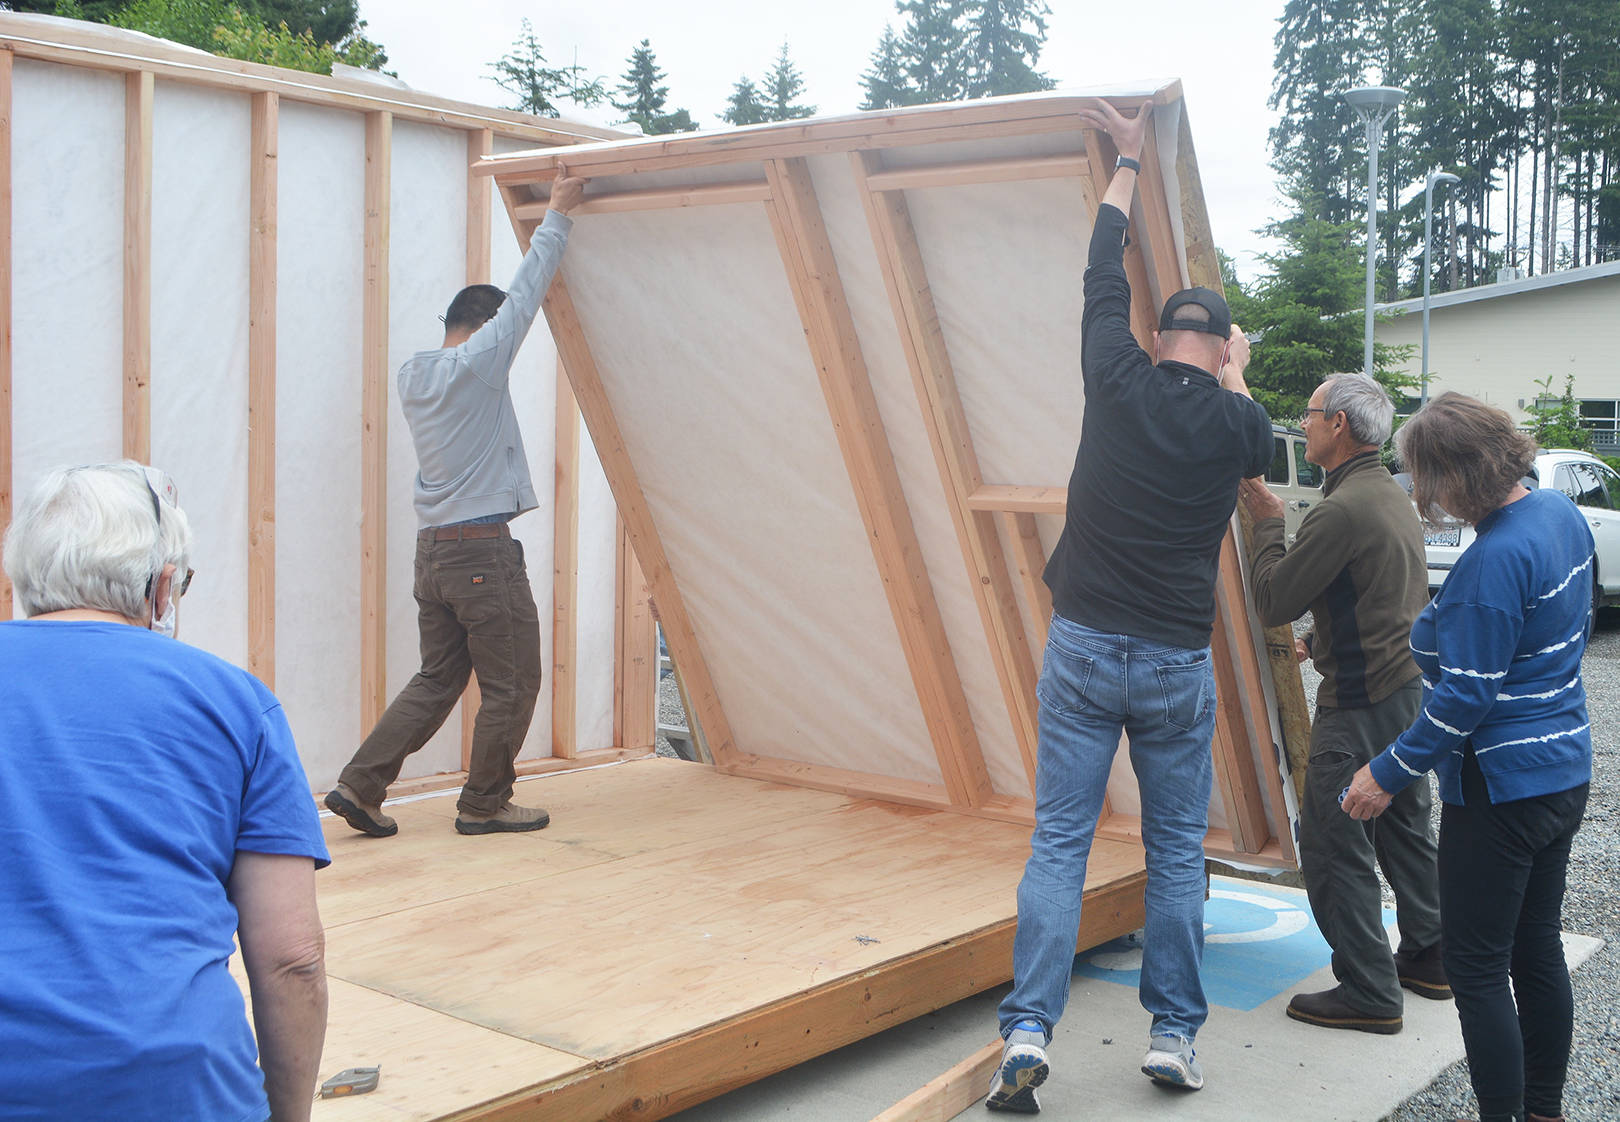 Volunteers put up one side of the tiny house.